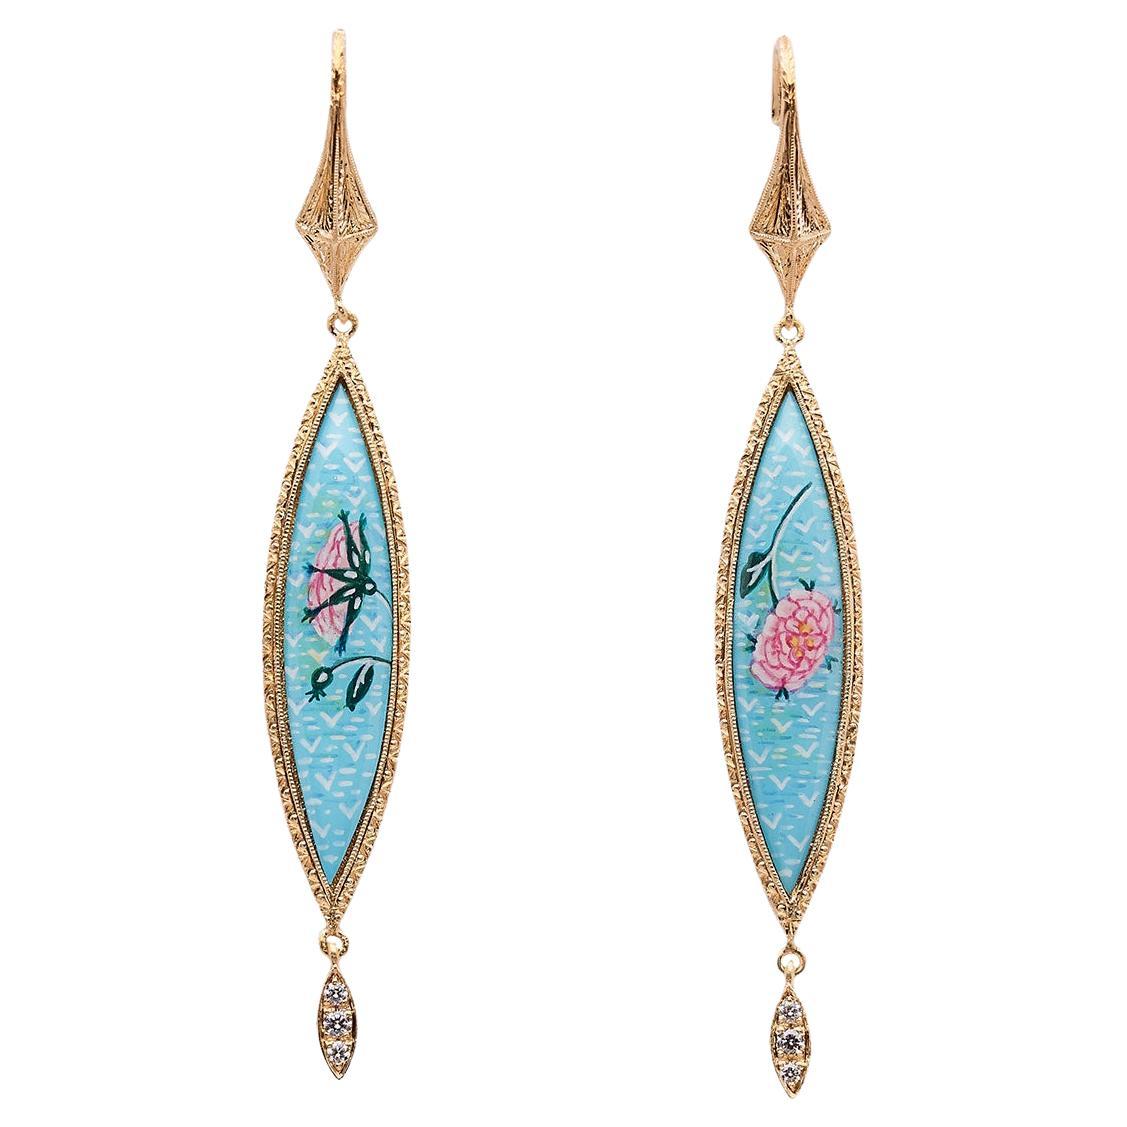 18kt gold earrings, Diamonds, engraved painted in miniature & enamelled by hands